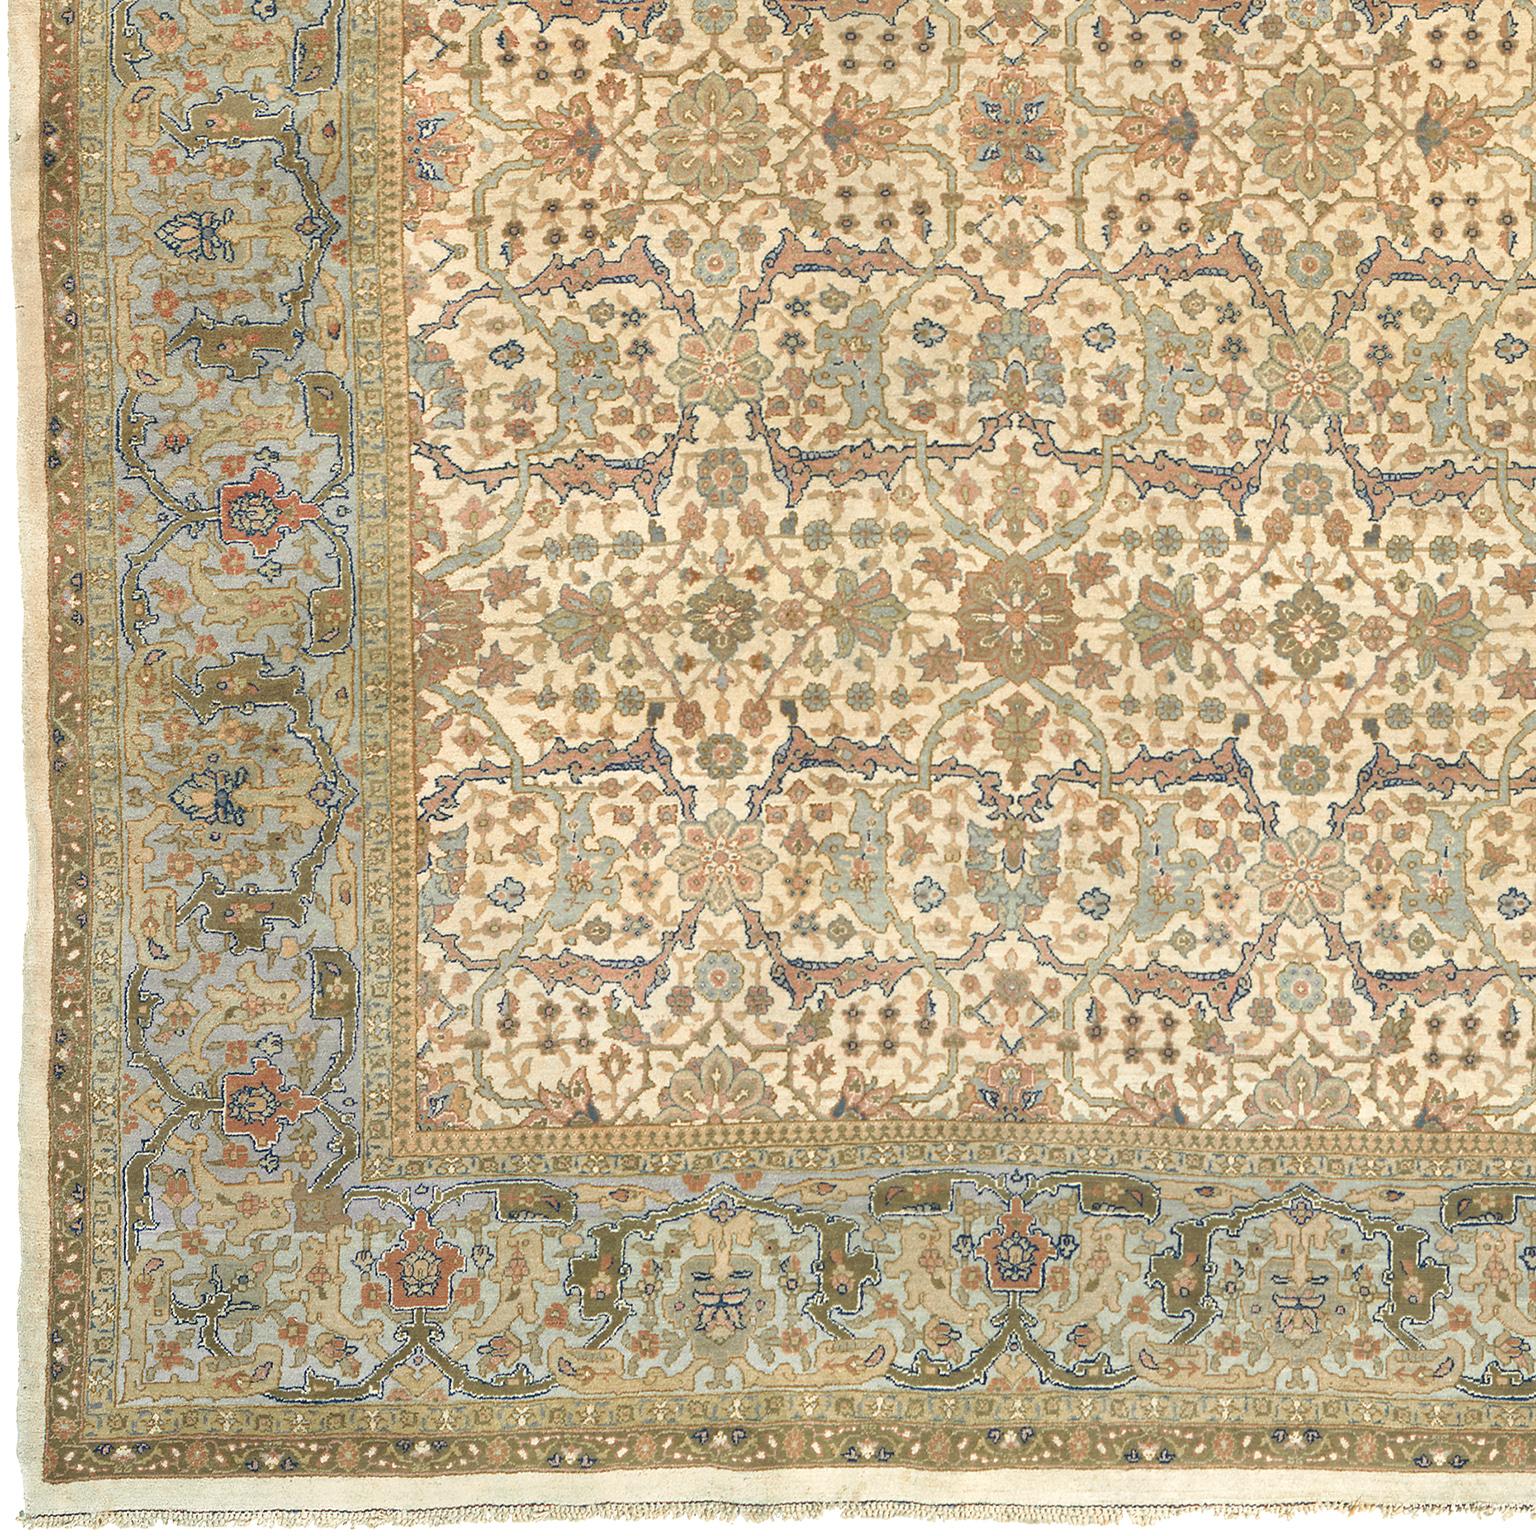 Antique Persian Tabriz rug.
North-West Persia, circa 1900.
The ivory field with an overall design of rosettes linking interlocking lattices of dusty pink and pale grey arabesques forming panels containing flowering vine, in a pale grey border of